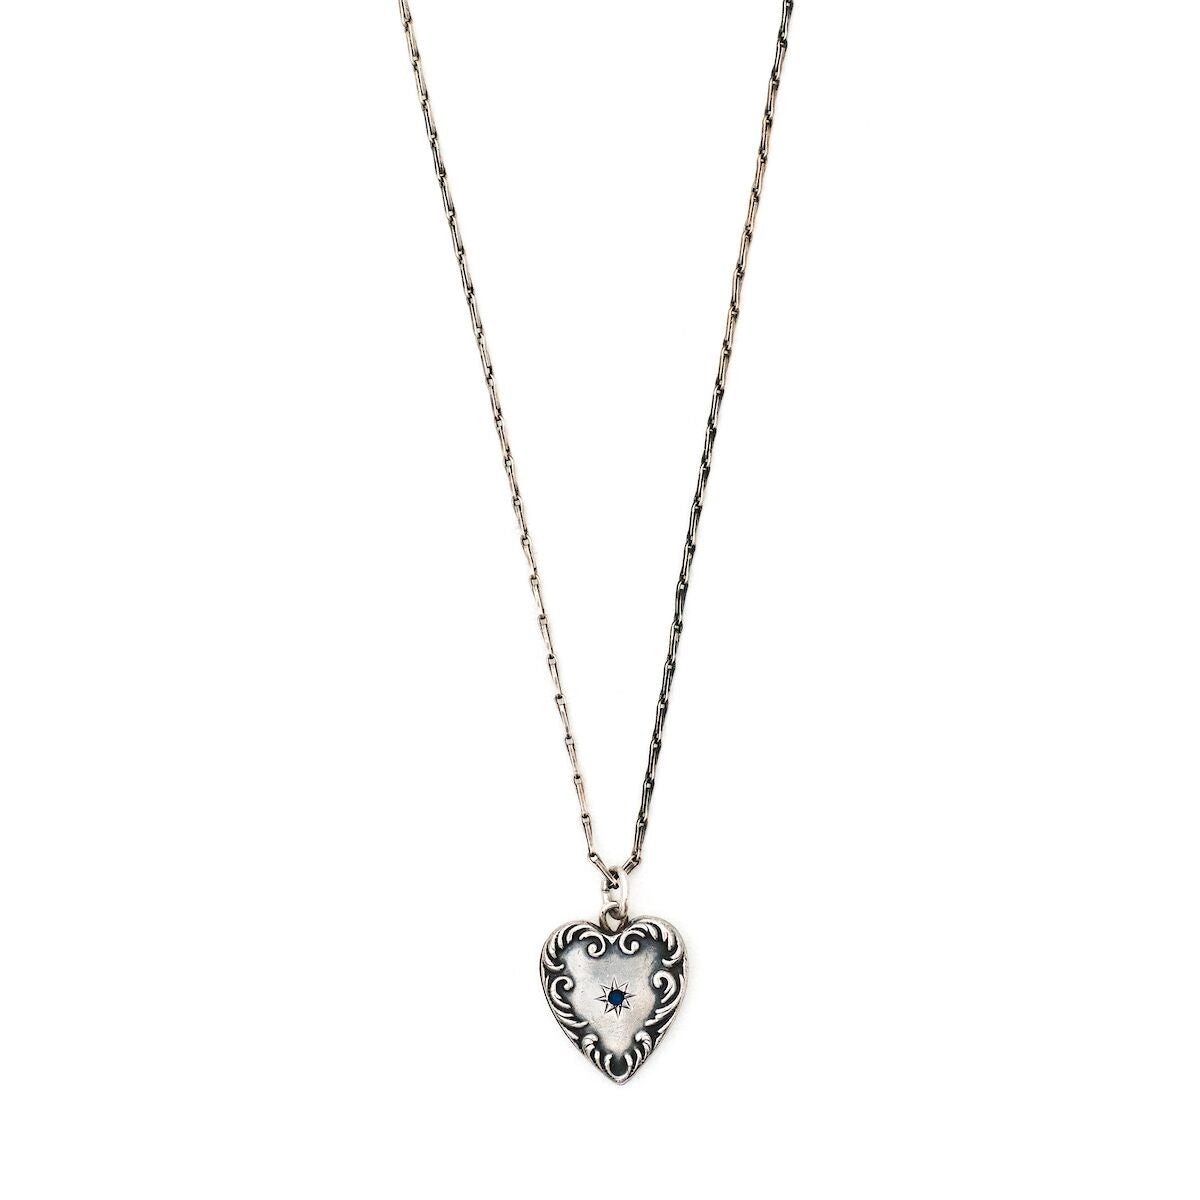 This heart charm is made of sterling silver and features a single blue cabochon stone inlaid in a star setting, and surrounded by a raised and textured border. The initials "AK" are finely etched on the back. Paired with one of our antique silver chains, this heart pendant can be worn both as a pendant or in a cluster of charms. Front charm view